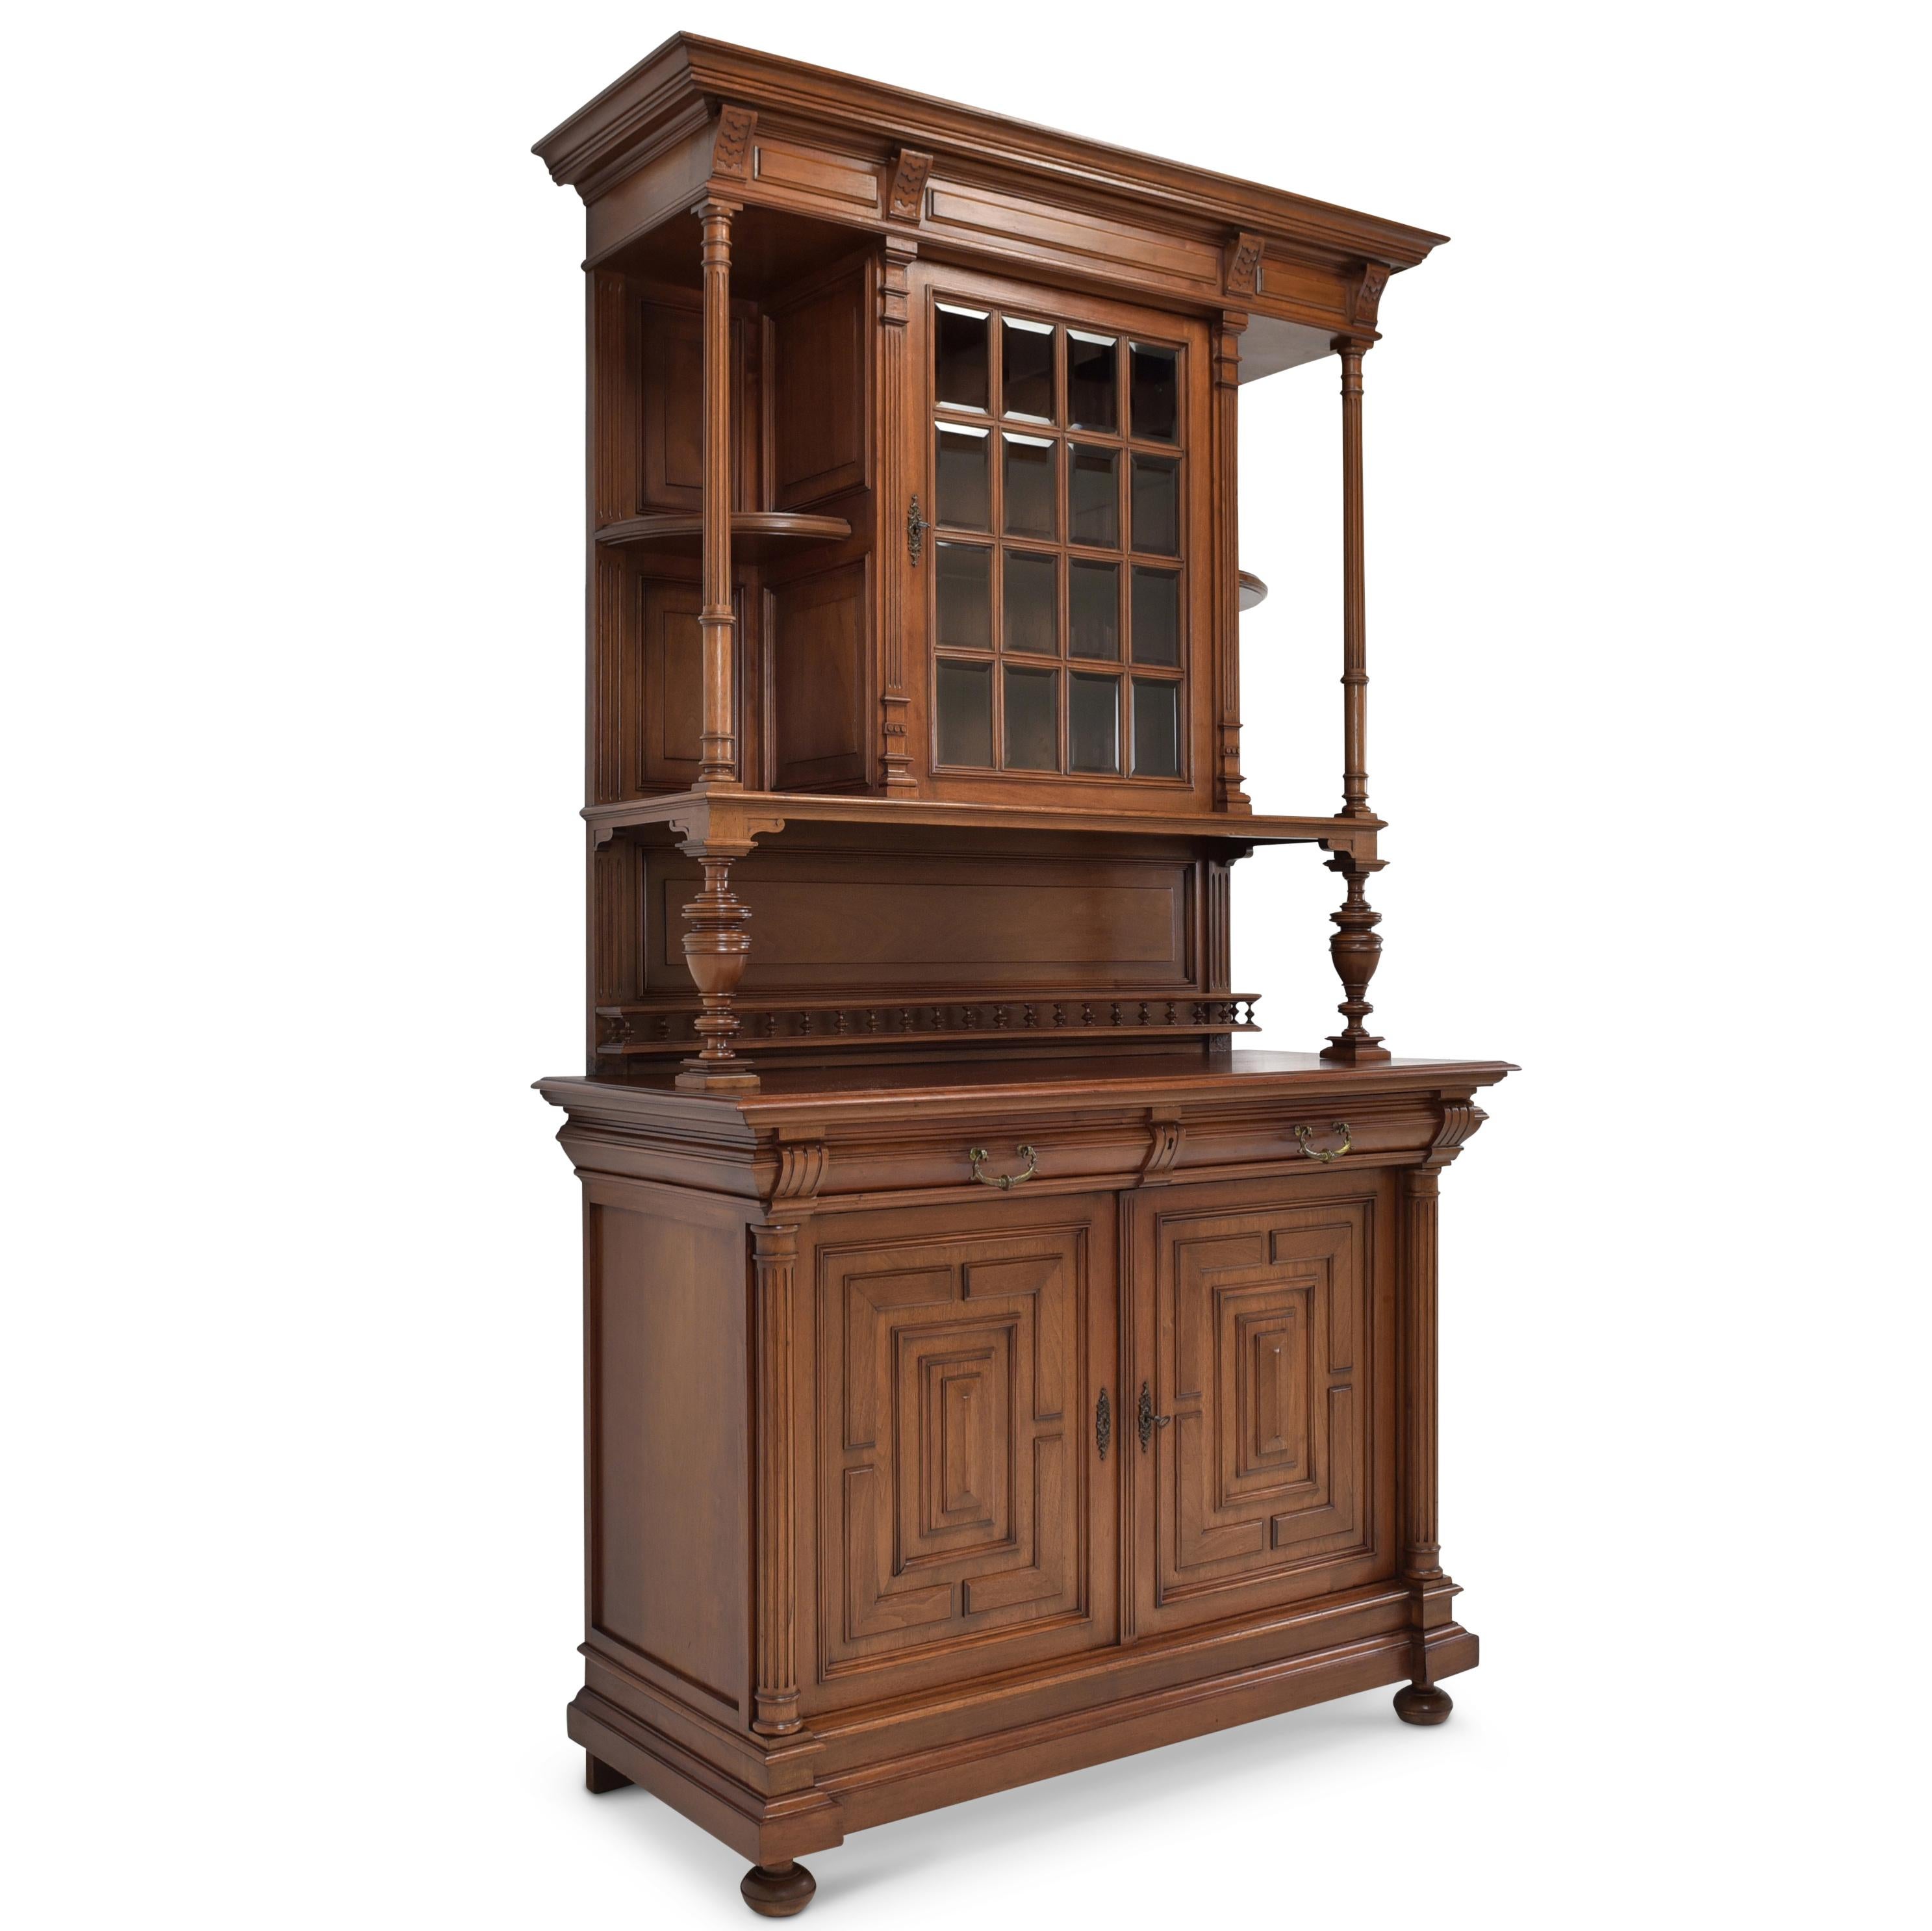 Buffet cabinet restored Wilhelminian style around 1900 solid walnut

Features:
Very high quality workmanship and Material quality
Drawers pronged
Original locks and fittings
Original 16-part faceted glazing
Shelves of the upper part are